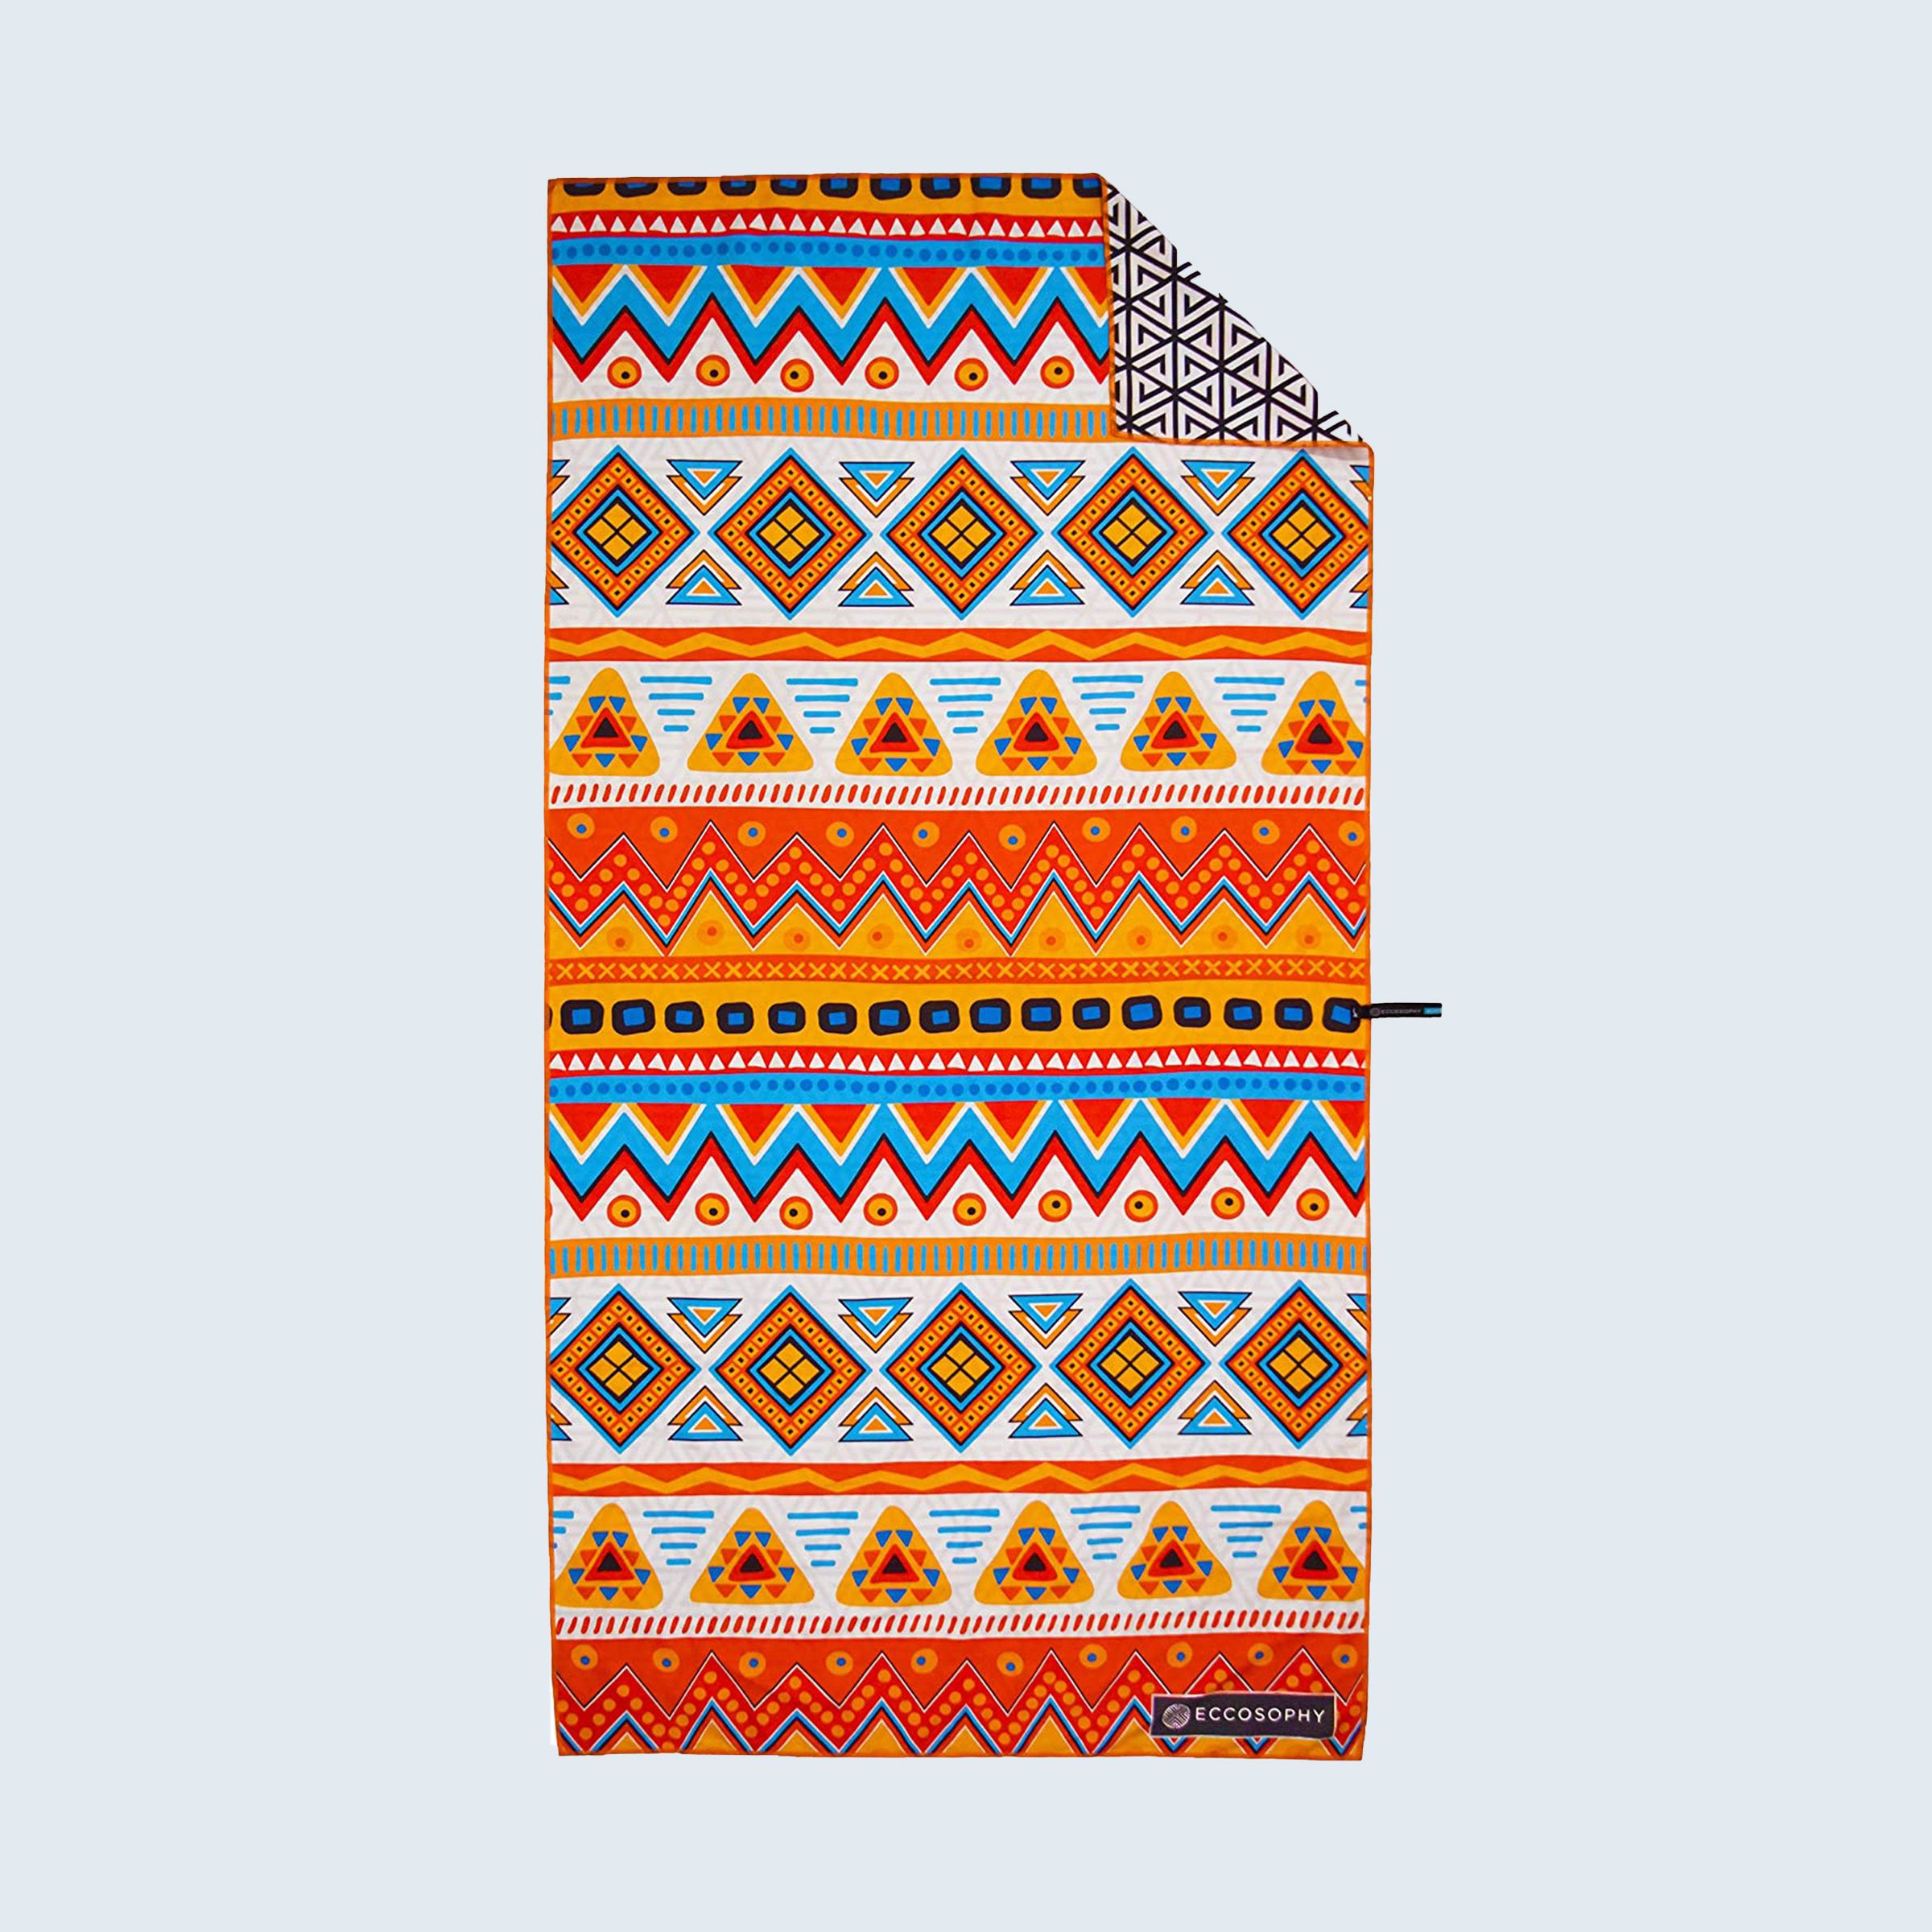 15 Best Beach Towels According to Reviews 2022 | Reader's Digest